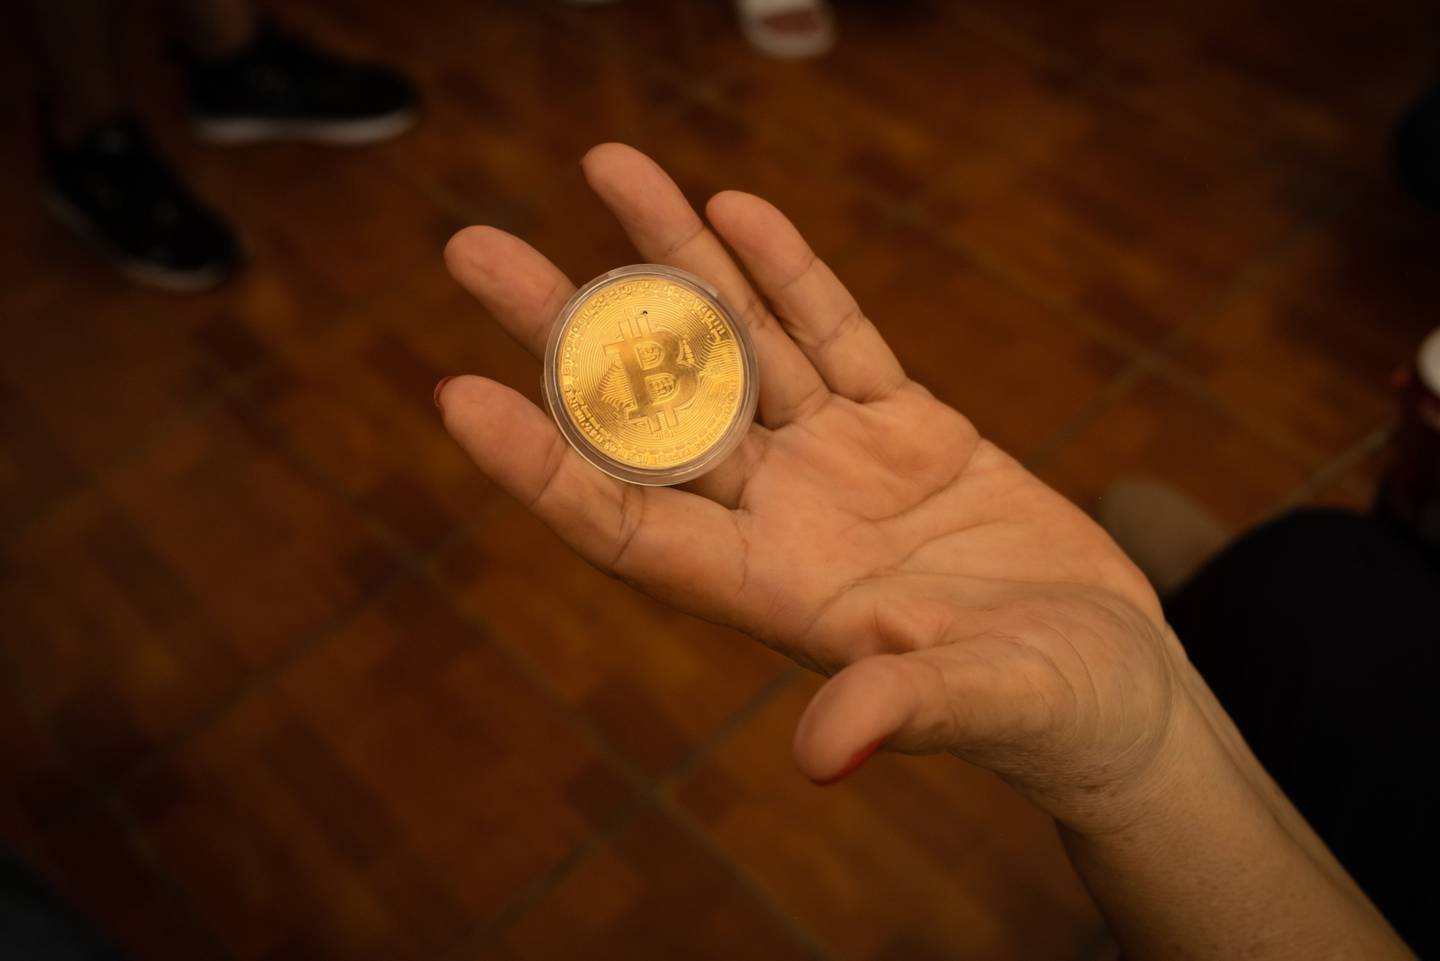 A person holds a Bitcoin token at the Bitcoin automated teller machine (ATM) in El Zonte, El Salvador.